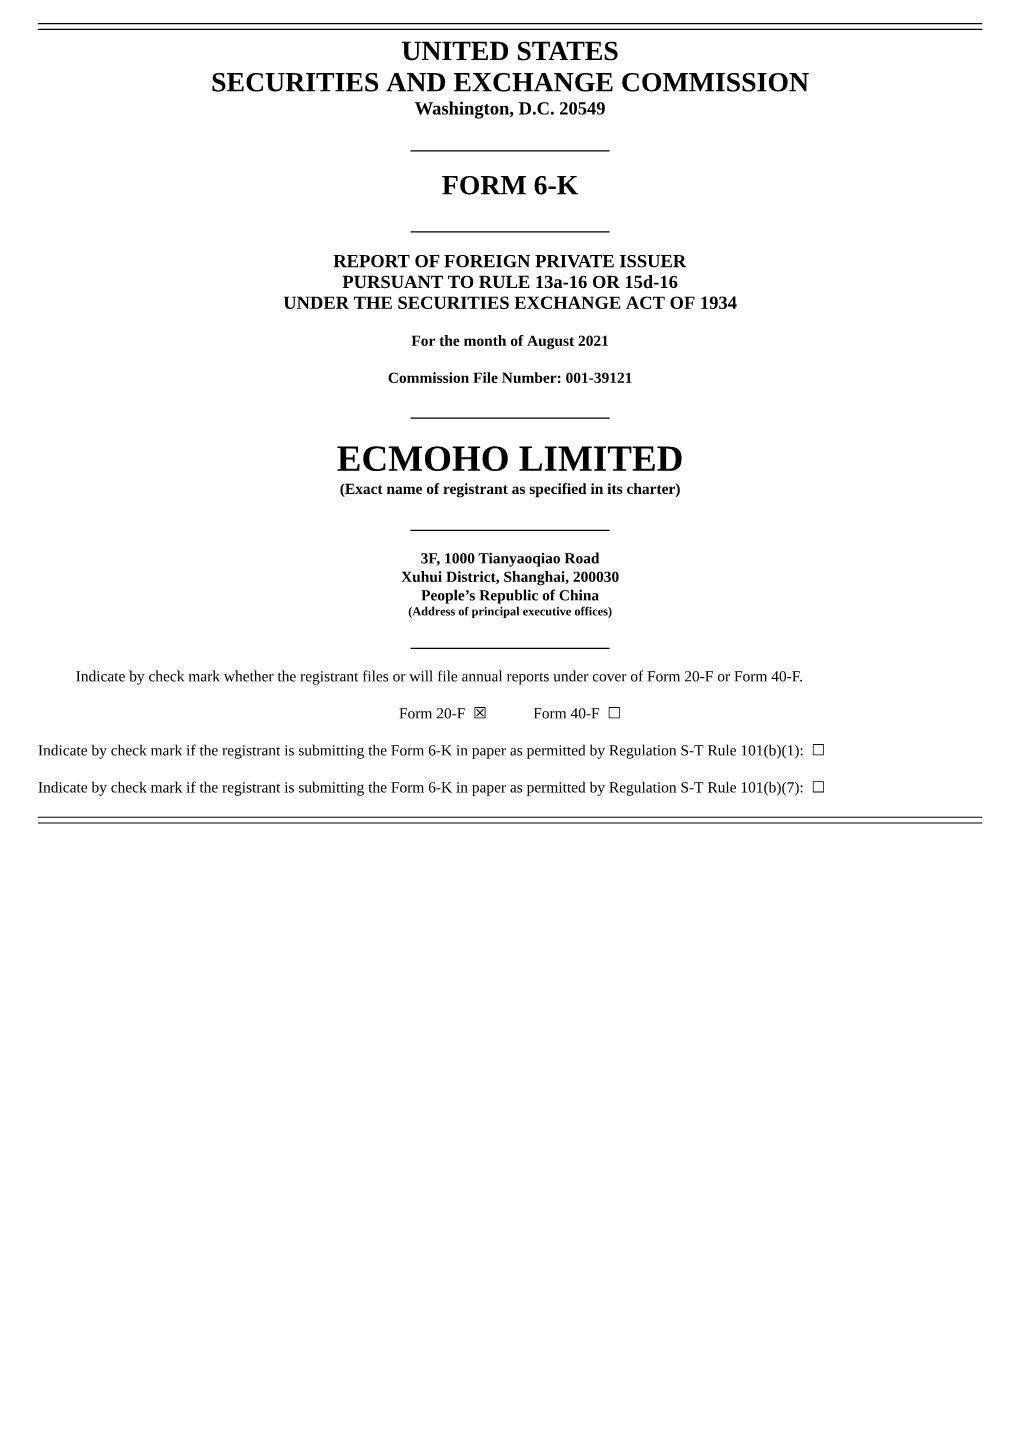 ECMOHO LIMITED (Exact Name of Registrant As Specified in Its Charter)